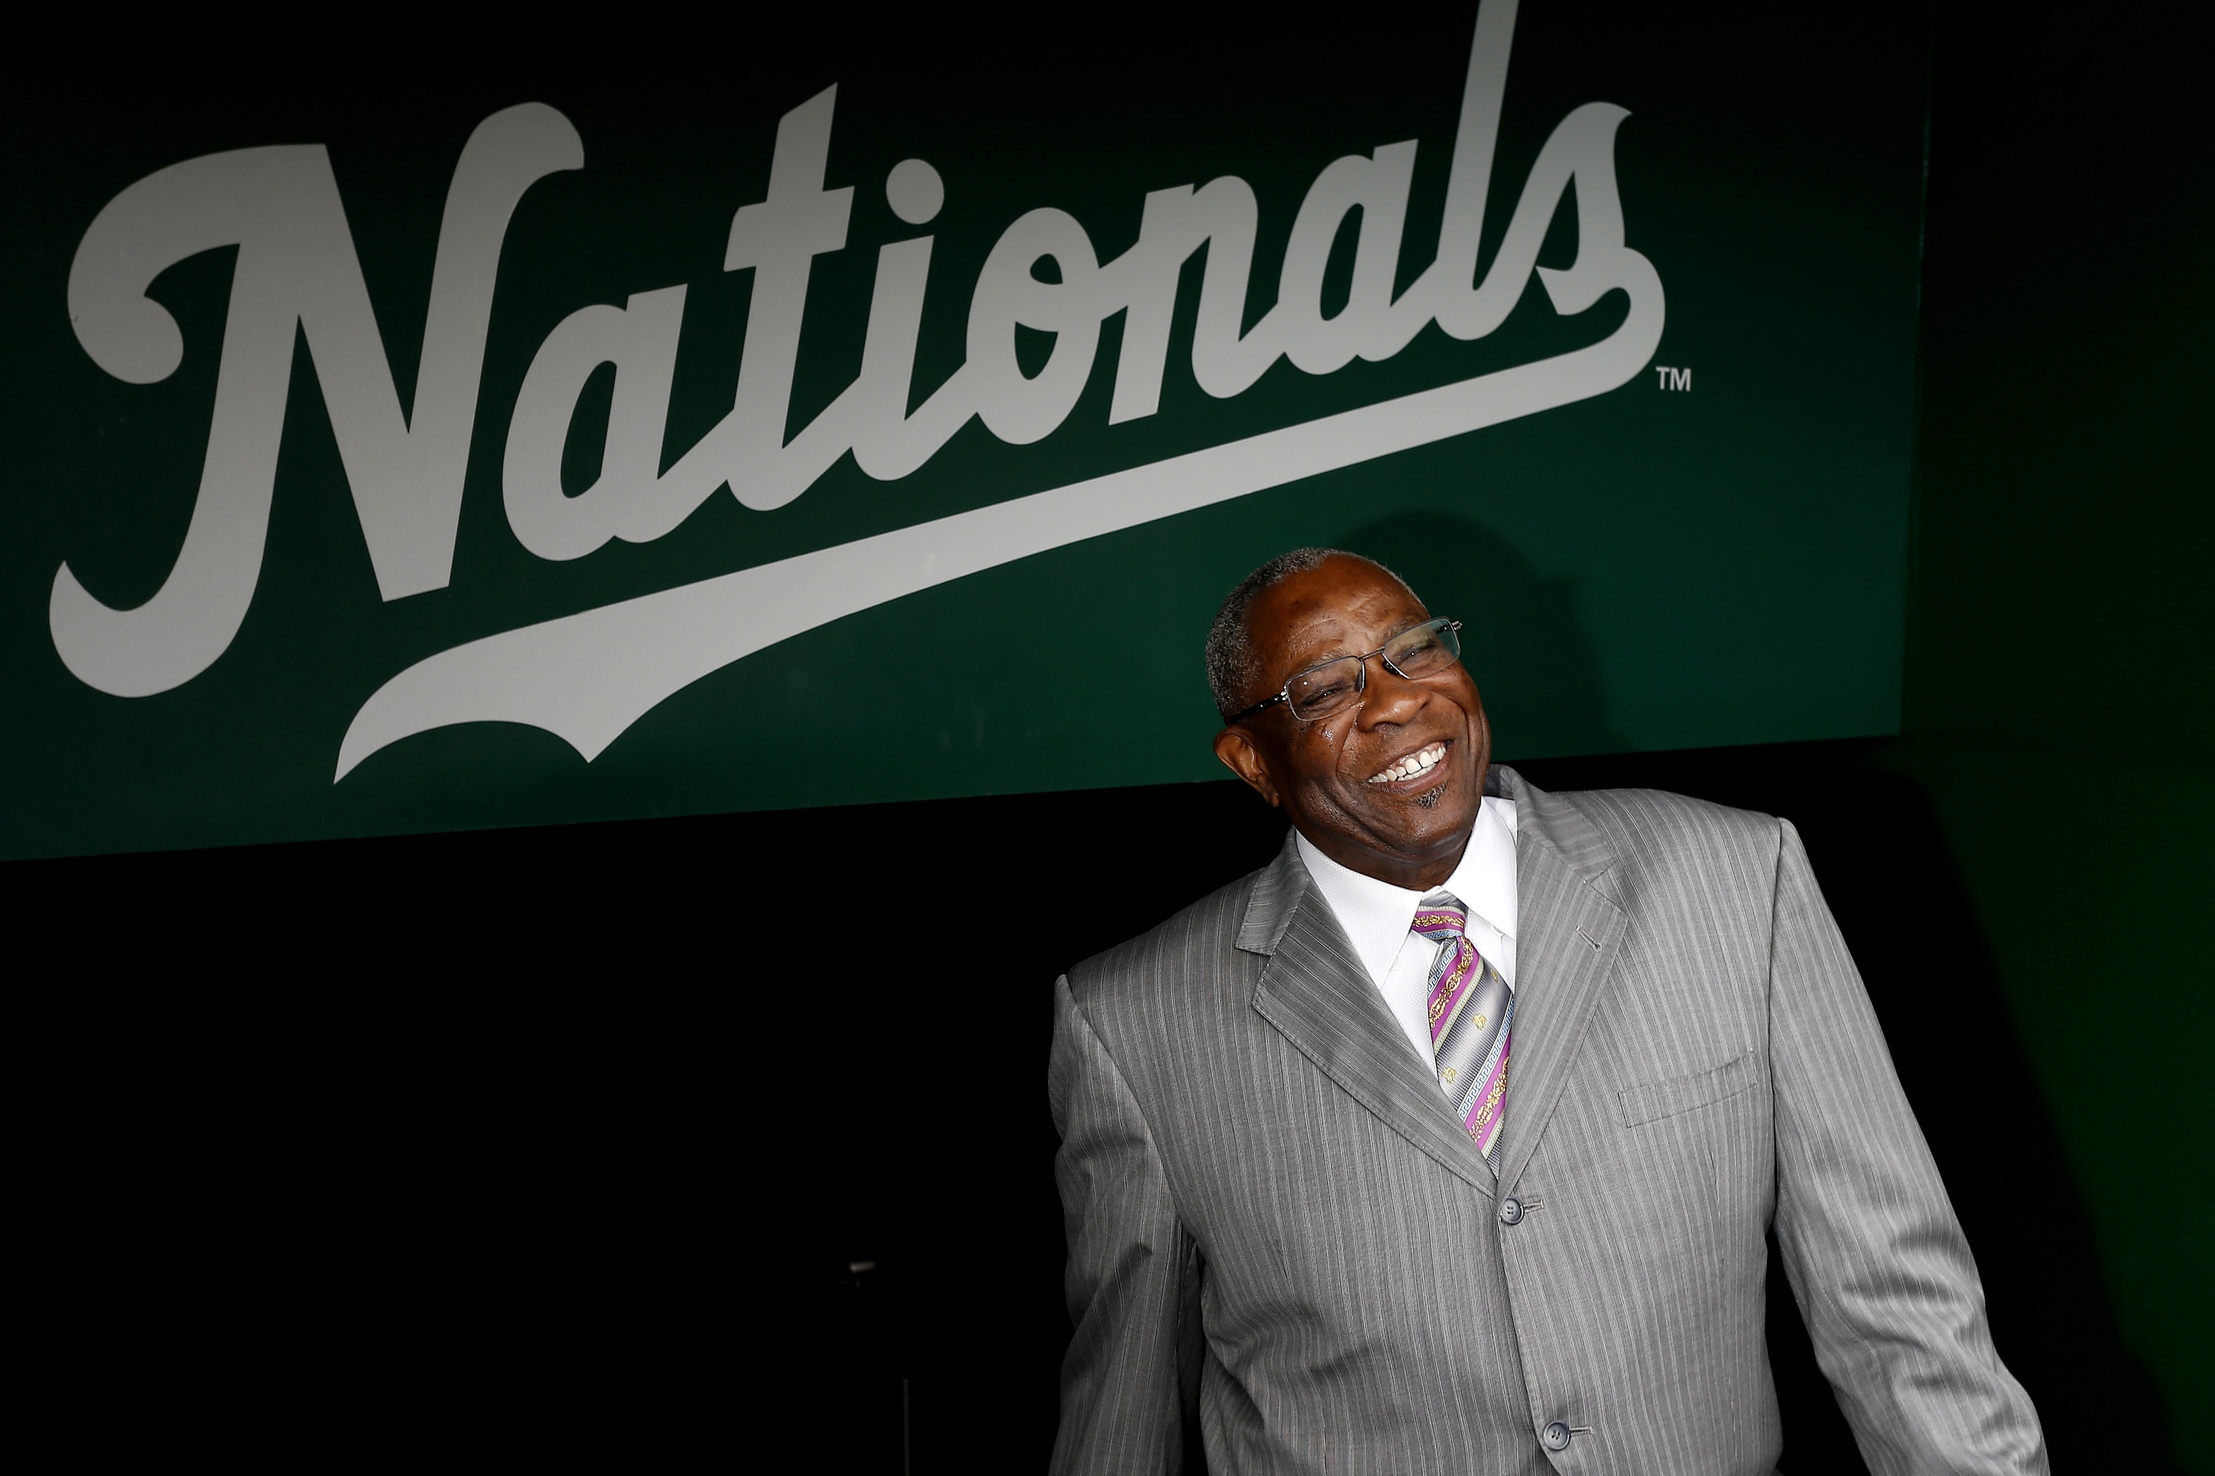 Nov 5, 2015; Washington, DC, USA; Washington Nationals manager Dusty Baker poses in the Nationals dugout after a press conference introducing Baker as the new Nationals manager at Nationals Park. Mandatory Credit: Geoff Burke-USA TODAY Sports